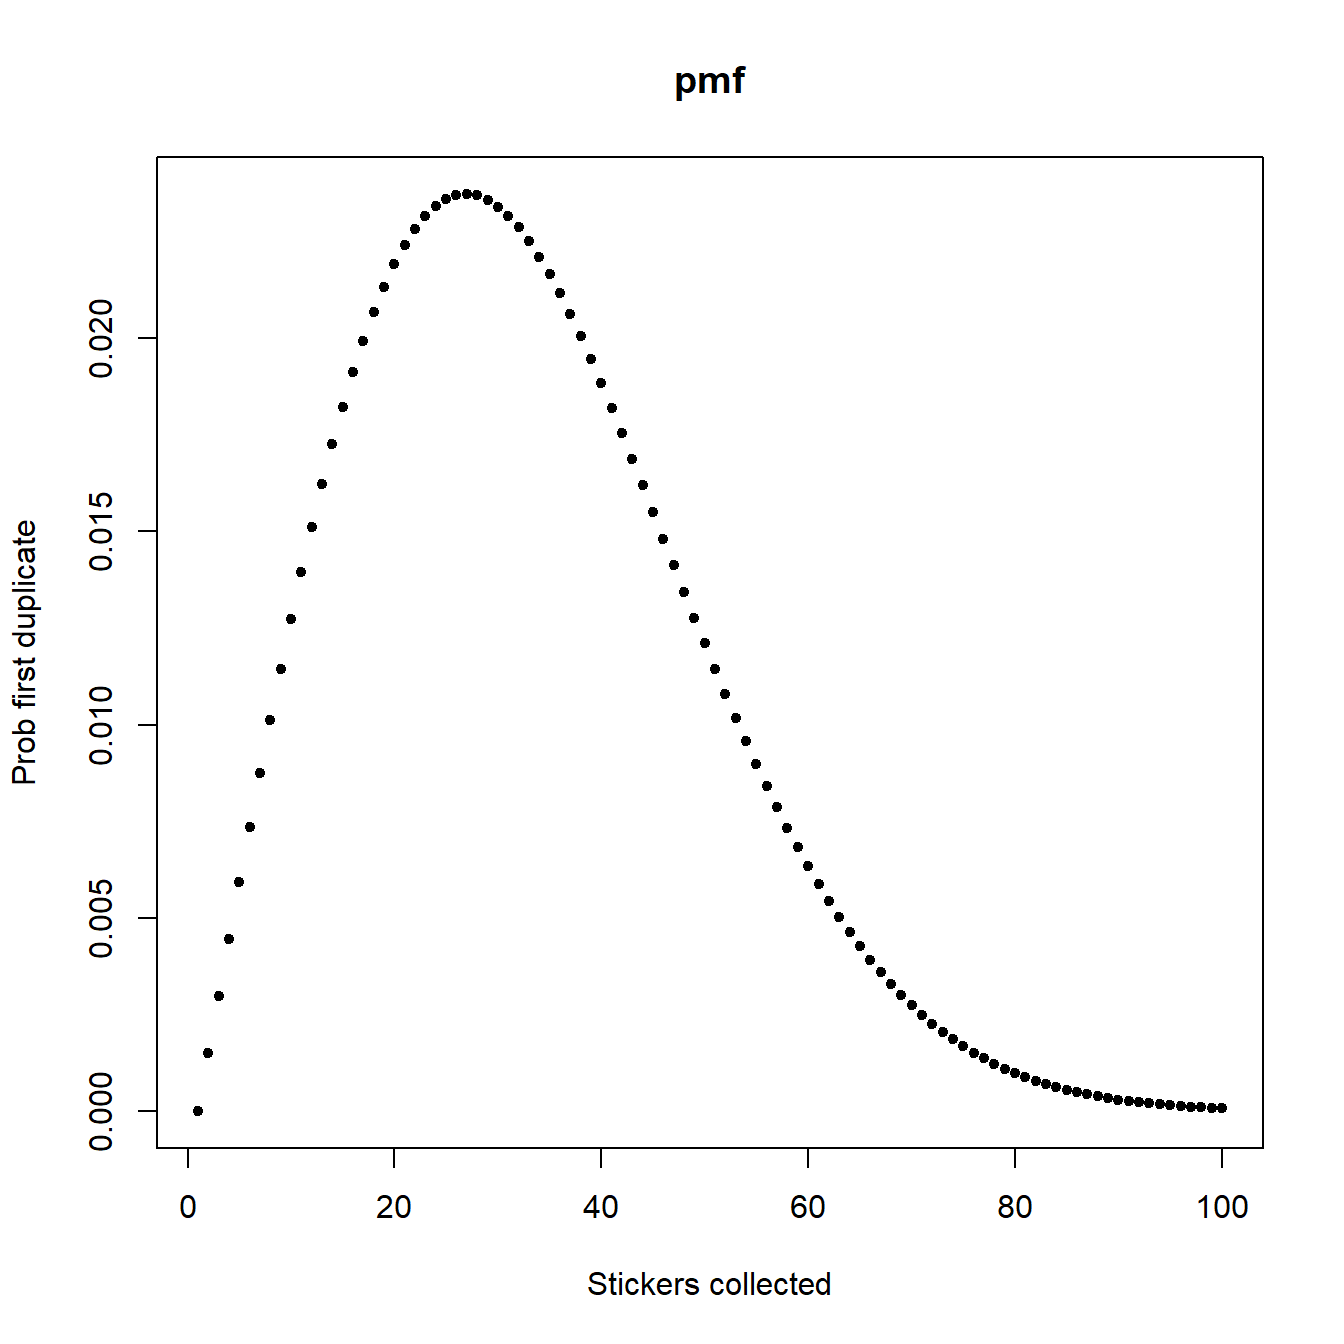 Probability of first duplicate at the $k^{th}$ sticker